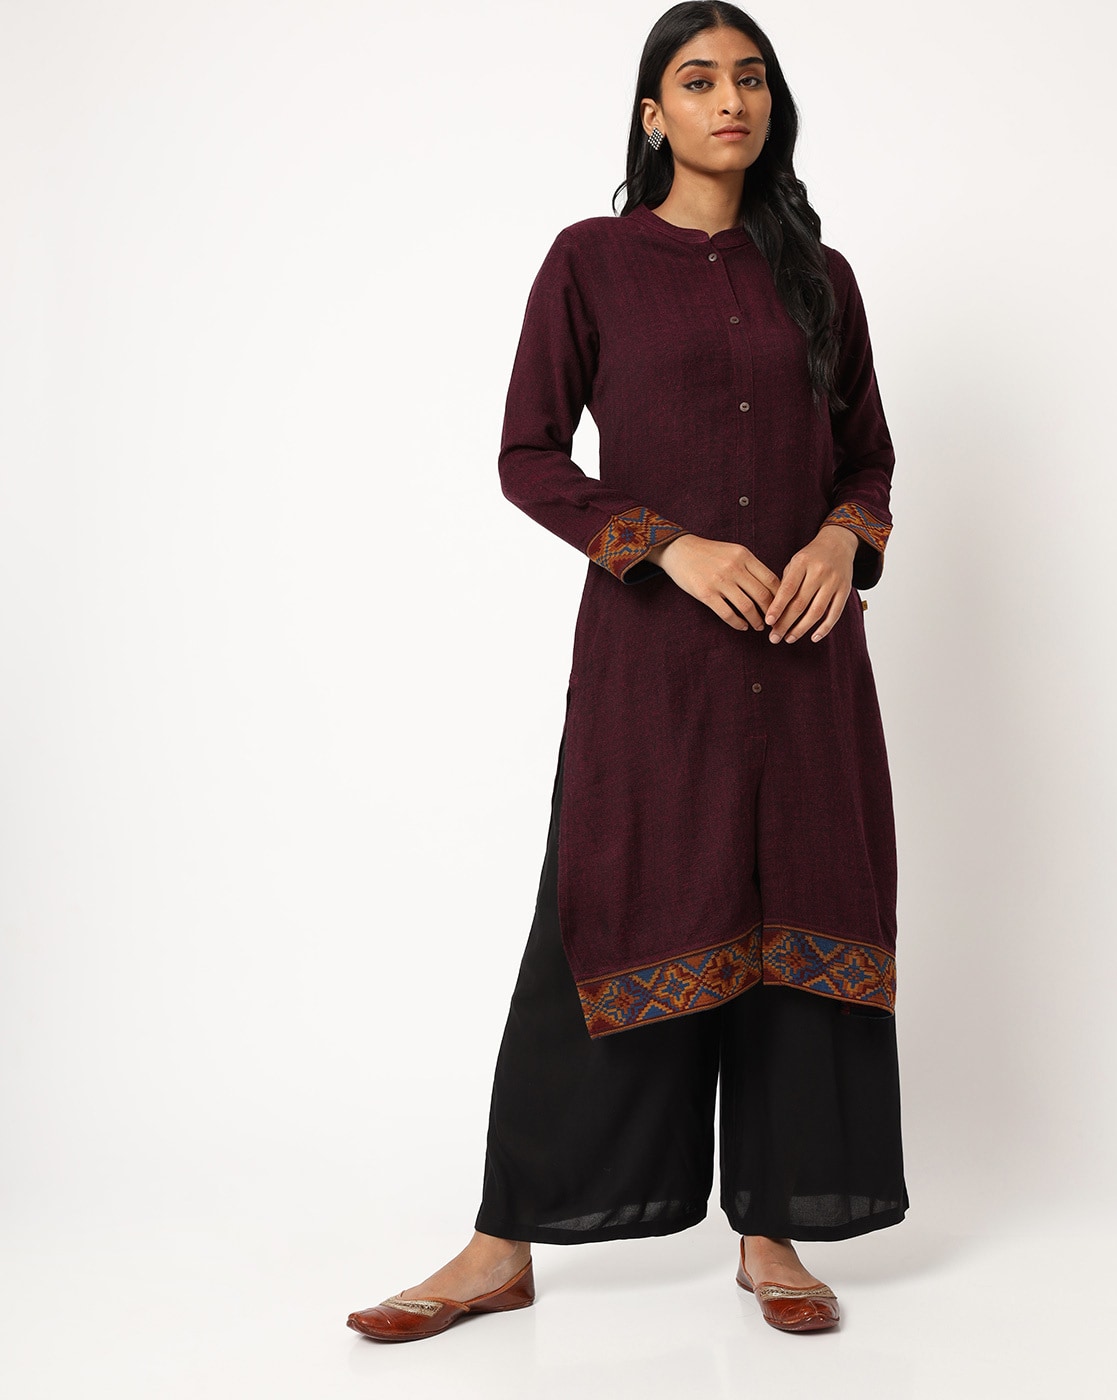 MidnightSail Woolen Kurti From Kashmir With Aari Embroidery  Exotic India  Art